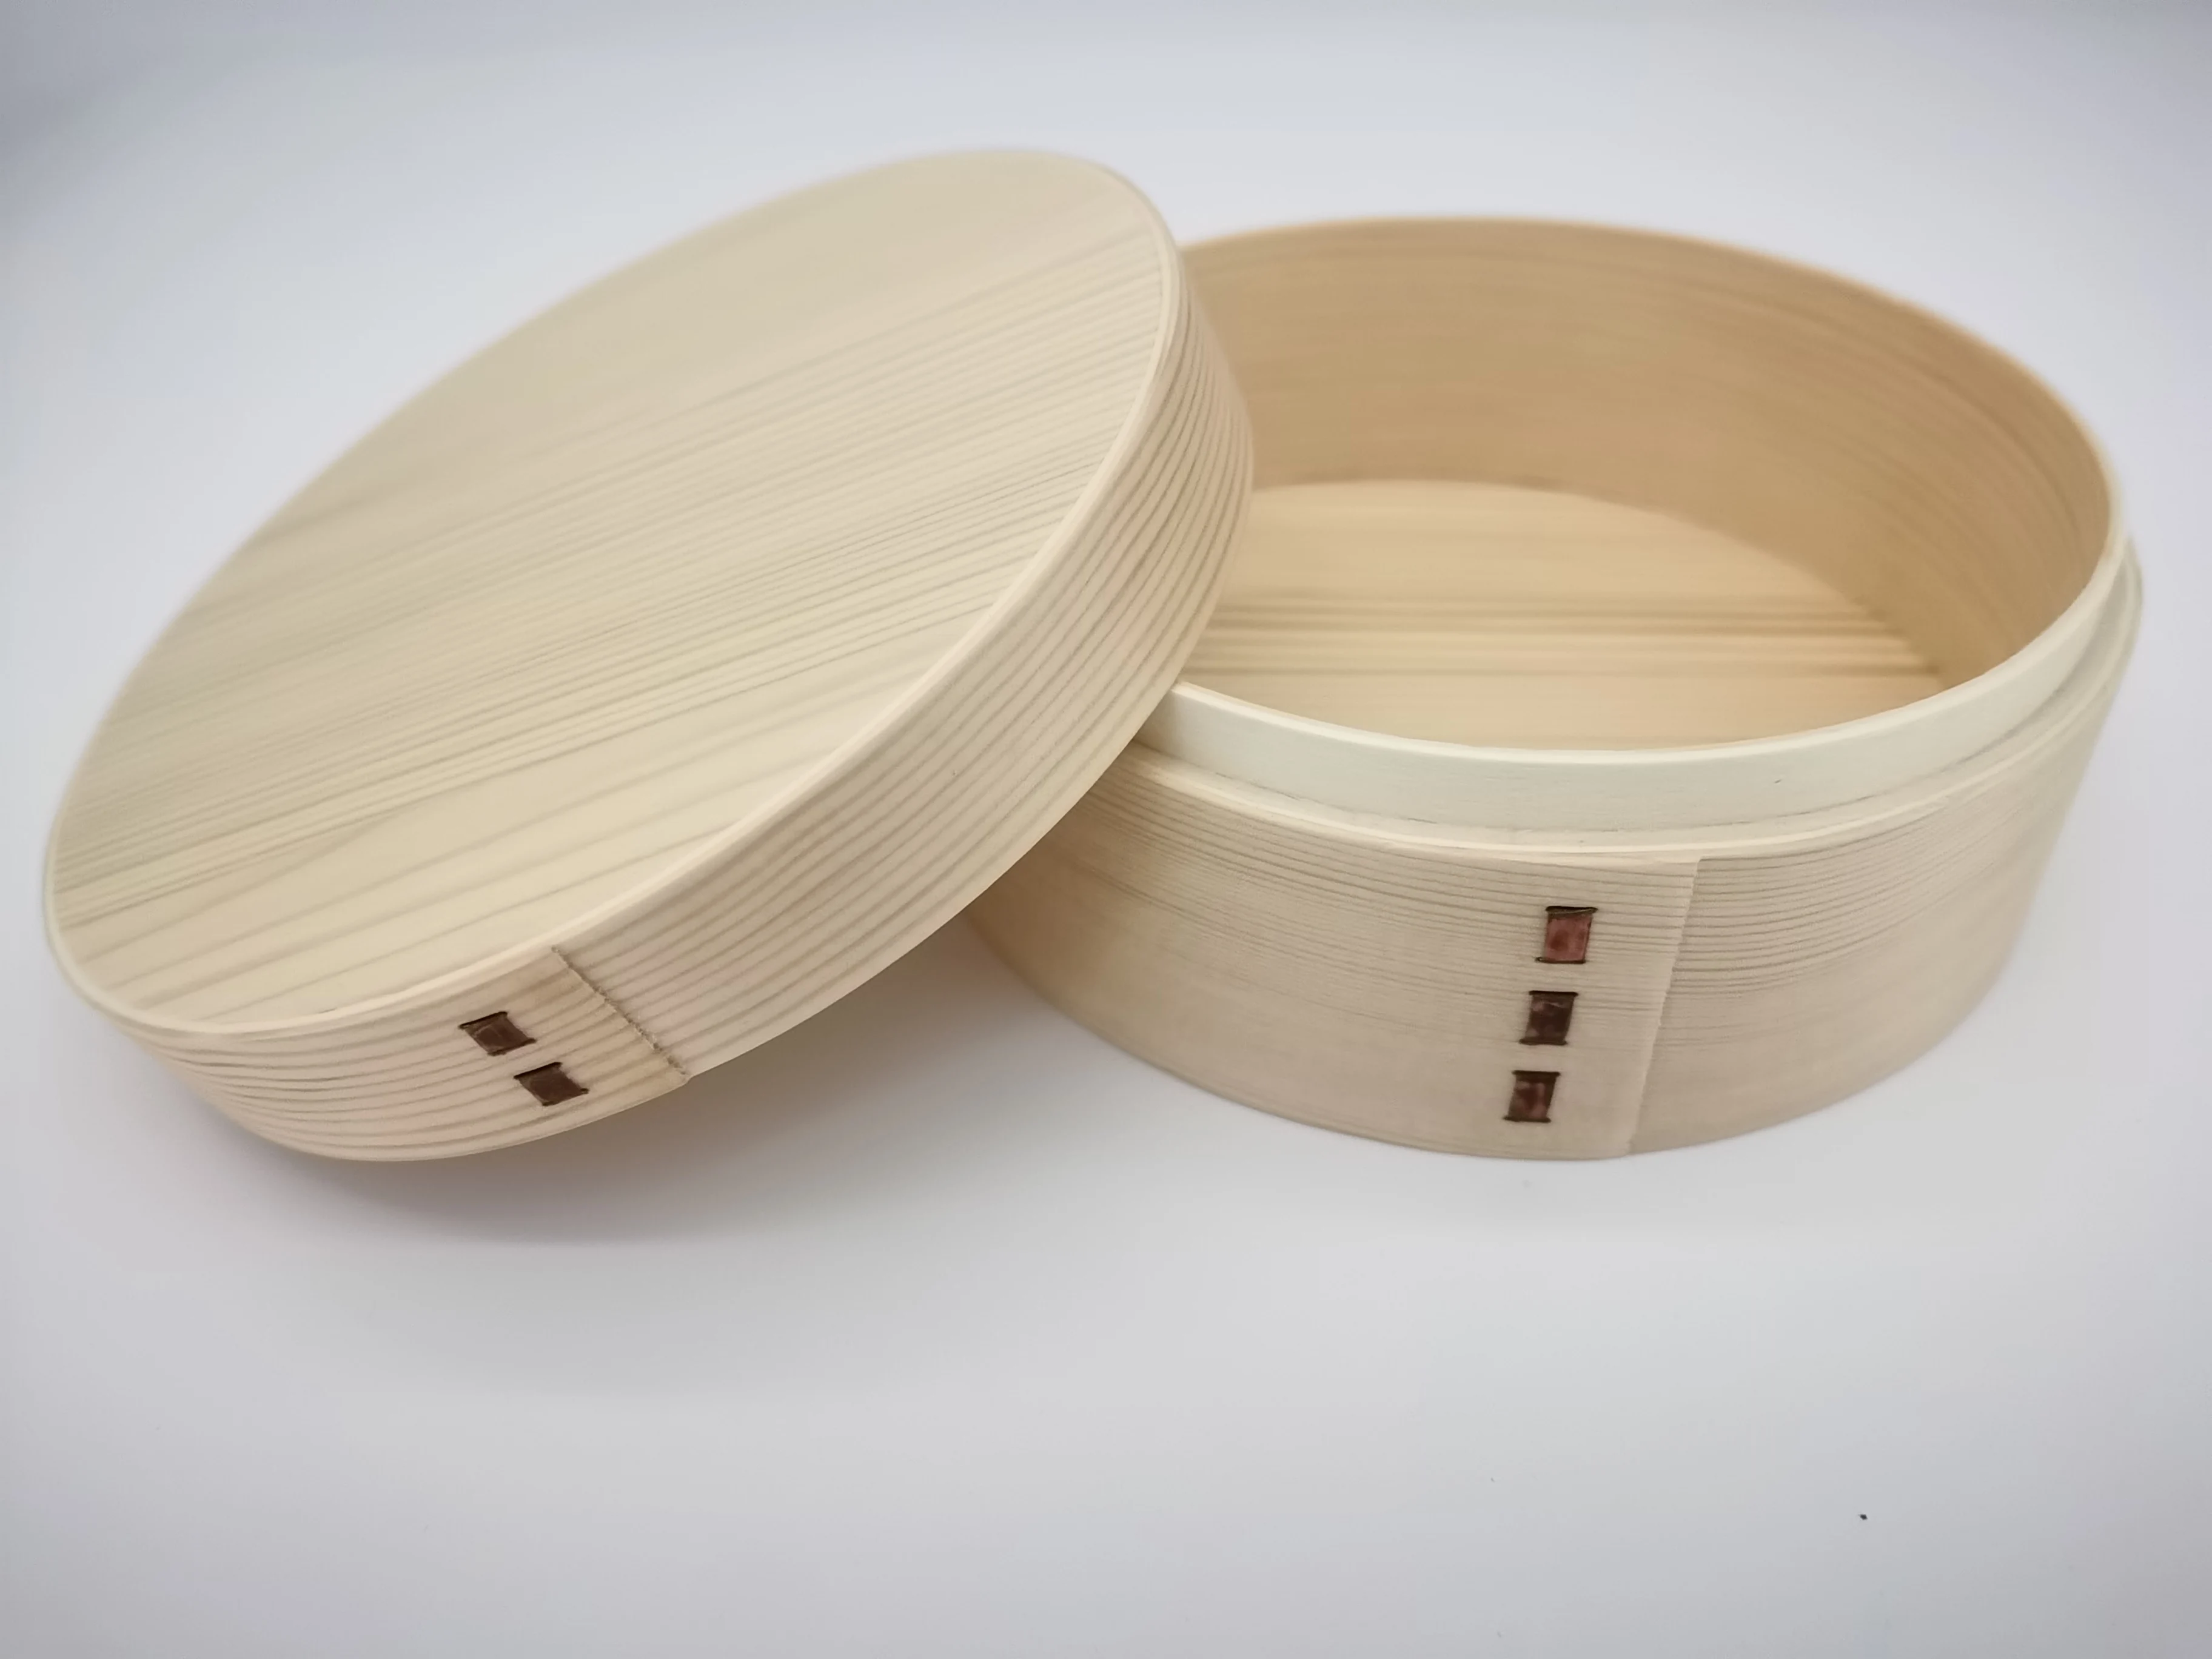 Green and environmentally friendly Japanese style cheap natural wooden bento box for sale